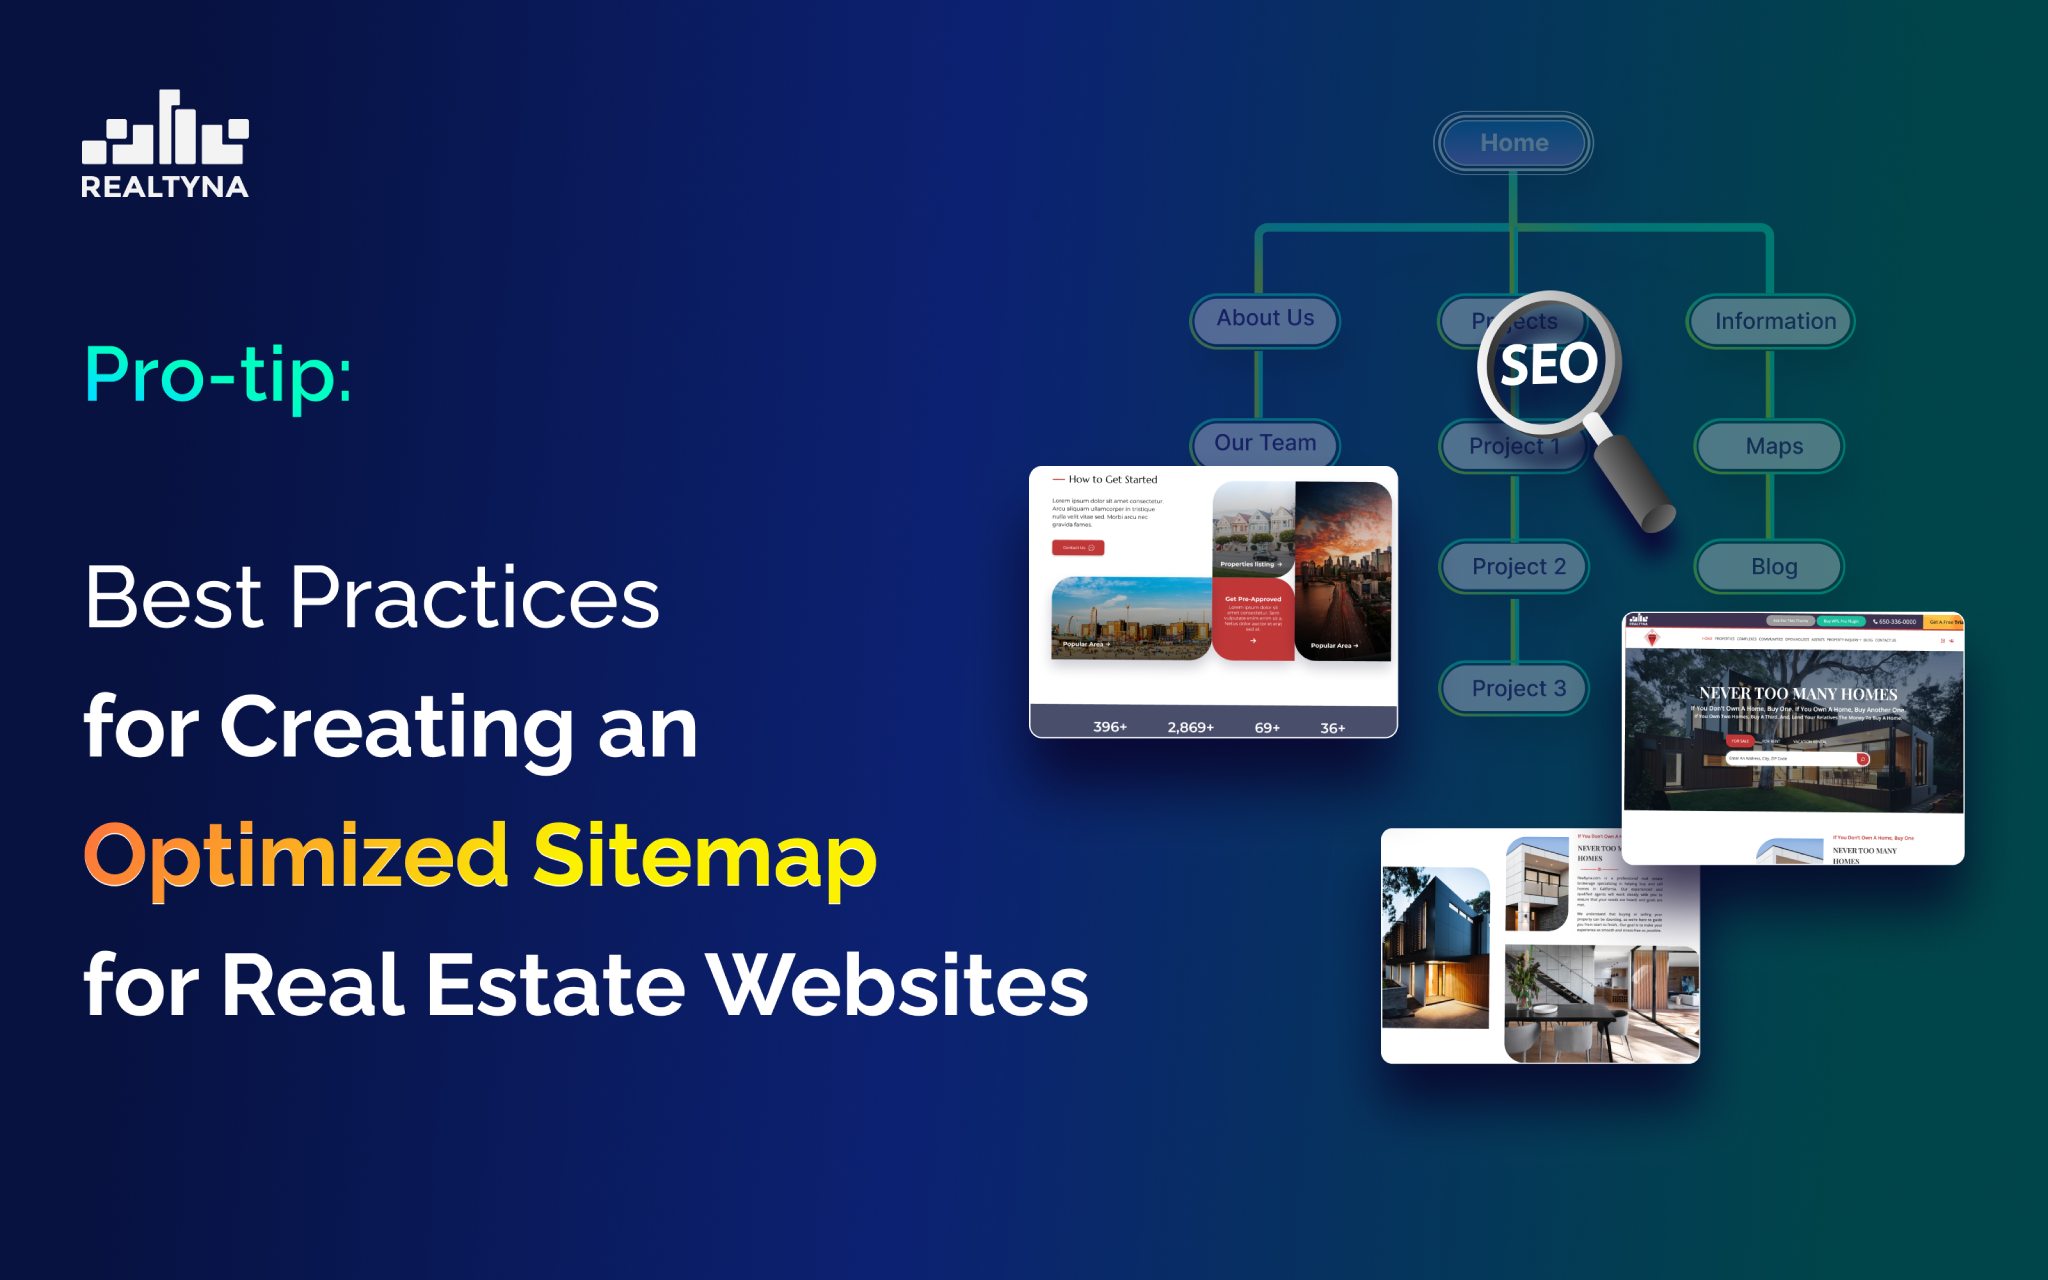 Best practices for creating an optimized sitemap for real estate websites